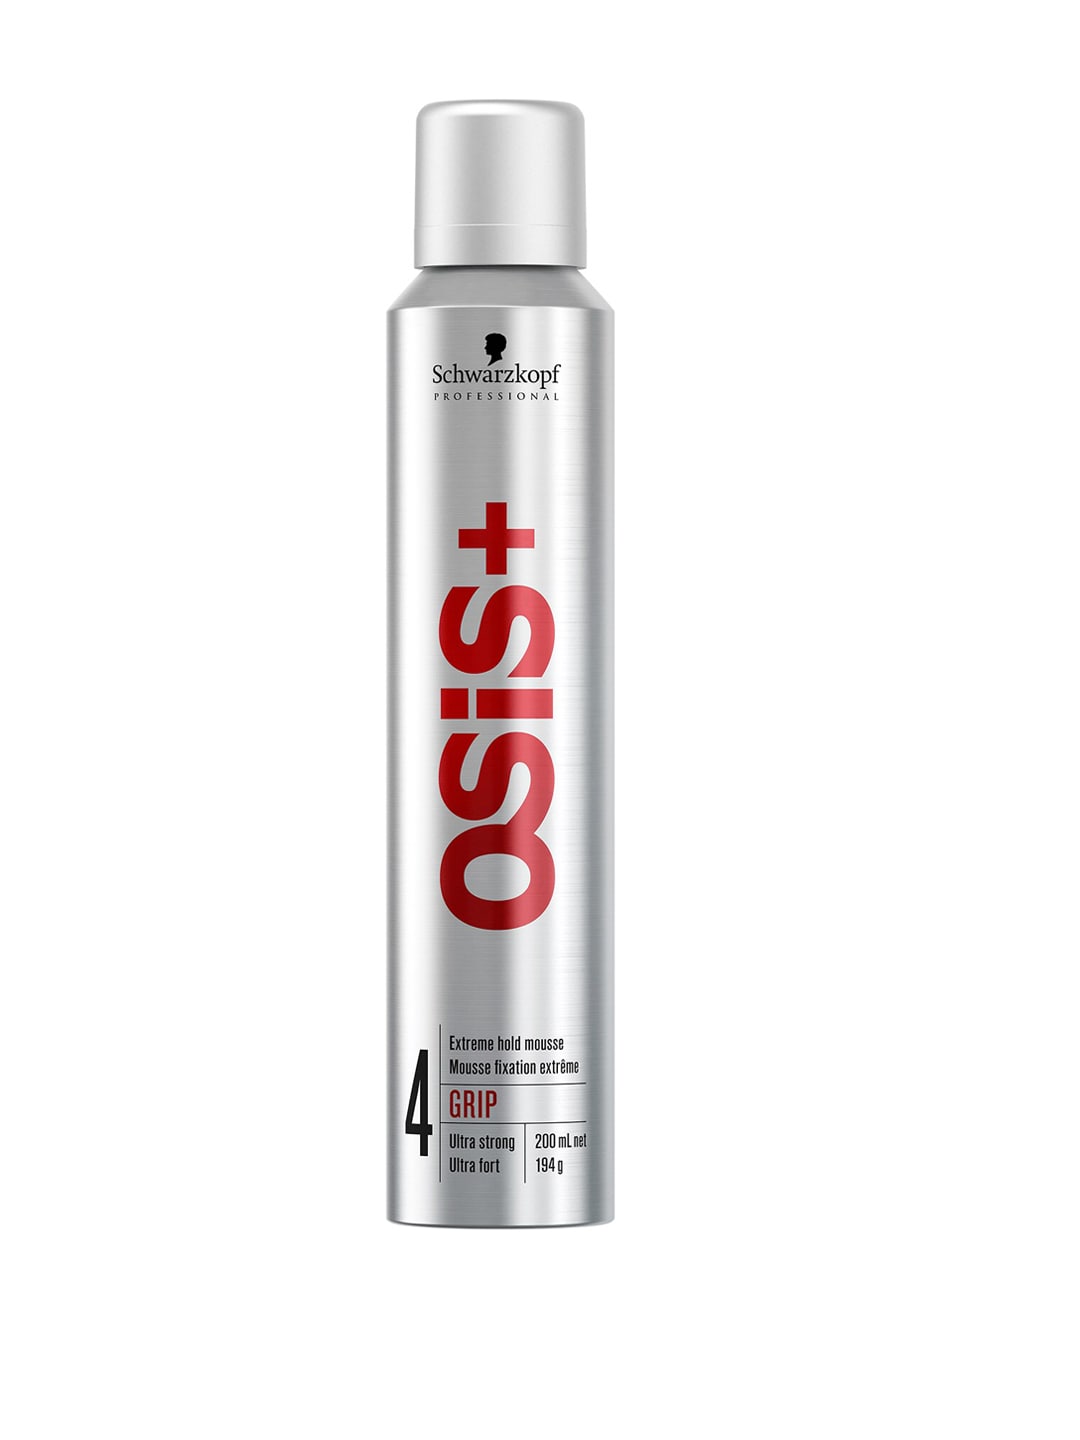 Schwarzkopf PROFESSIONAL Silver-Toned Osis+ Grip Extreme Hold Mousse 200ml Price in India